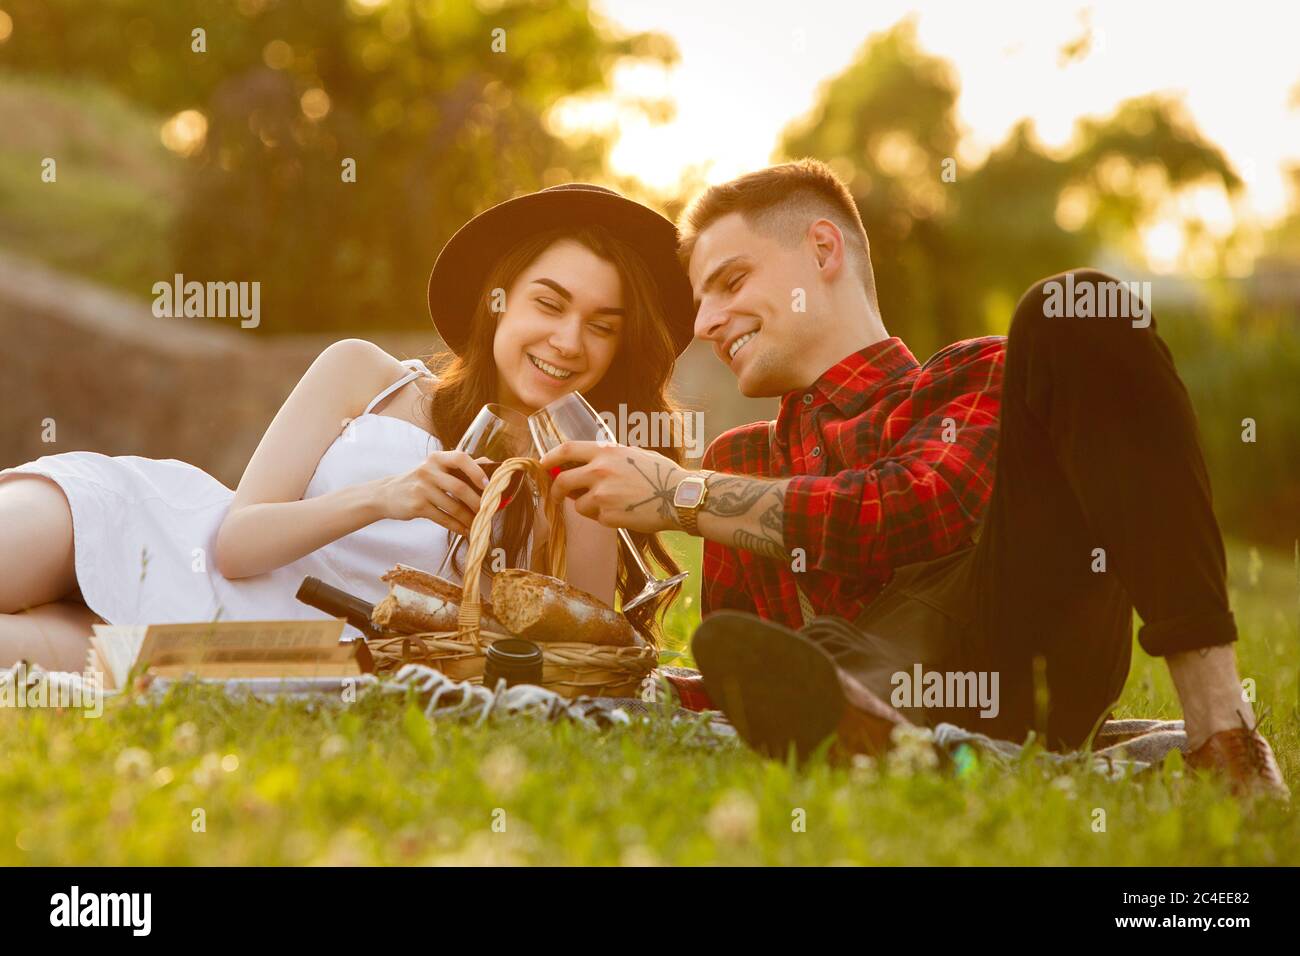 Clinking glasses with wine. Caucasian young couple enjoying weekend in the park on summer day. Look lovely, happy, cheerful. Concept of love, relationship, wellness, lifestyle. Sincere emotions. Stock Photo